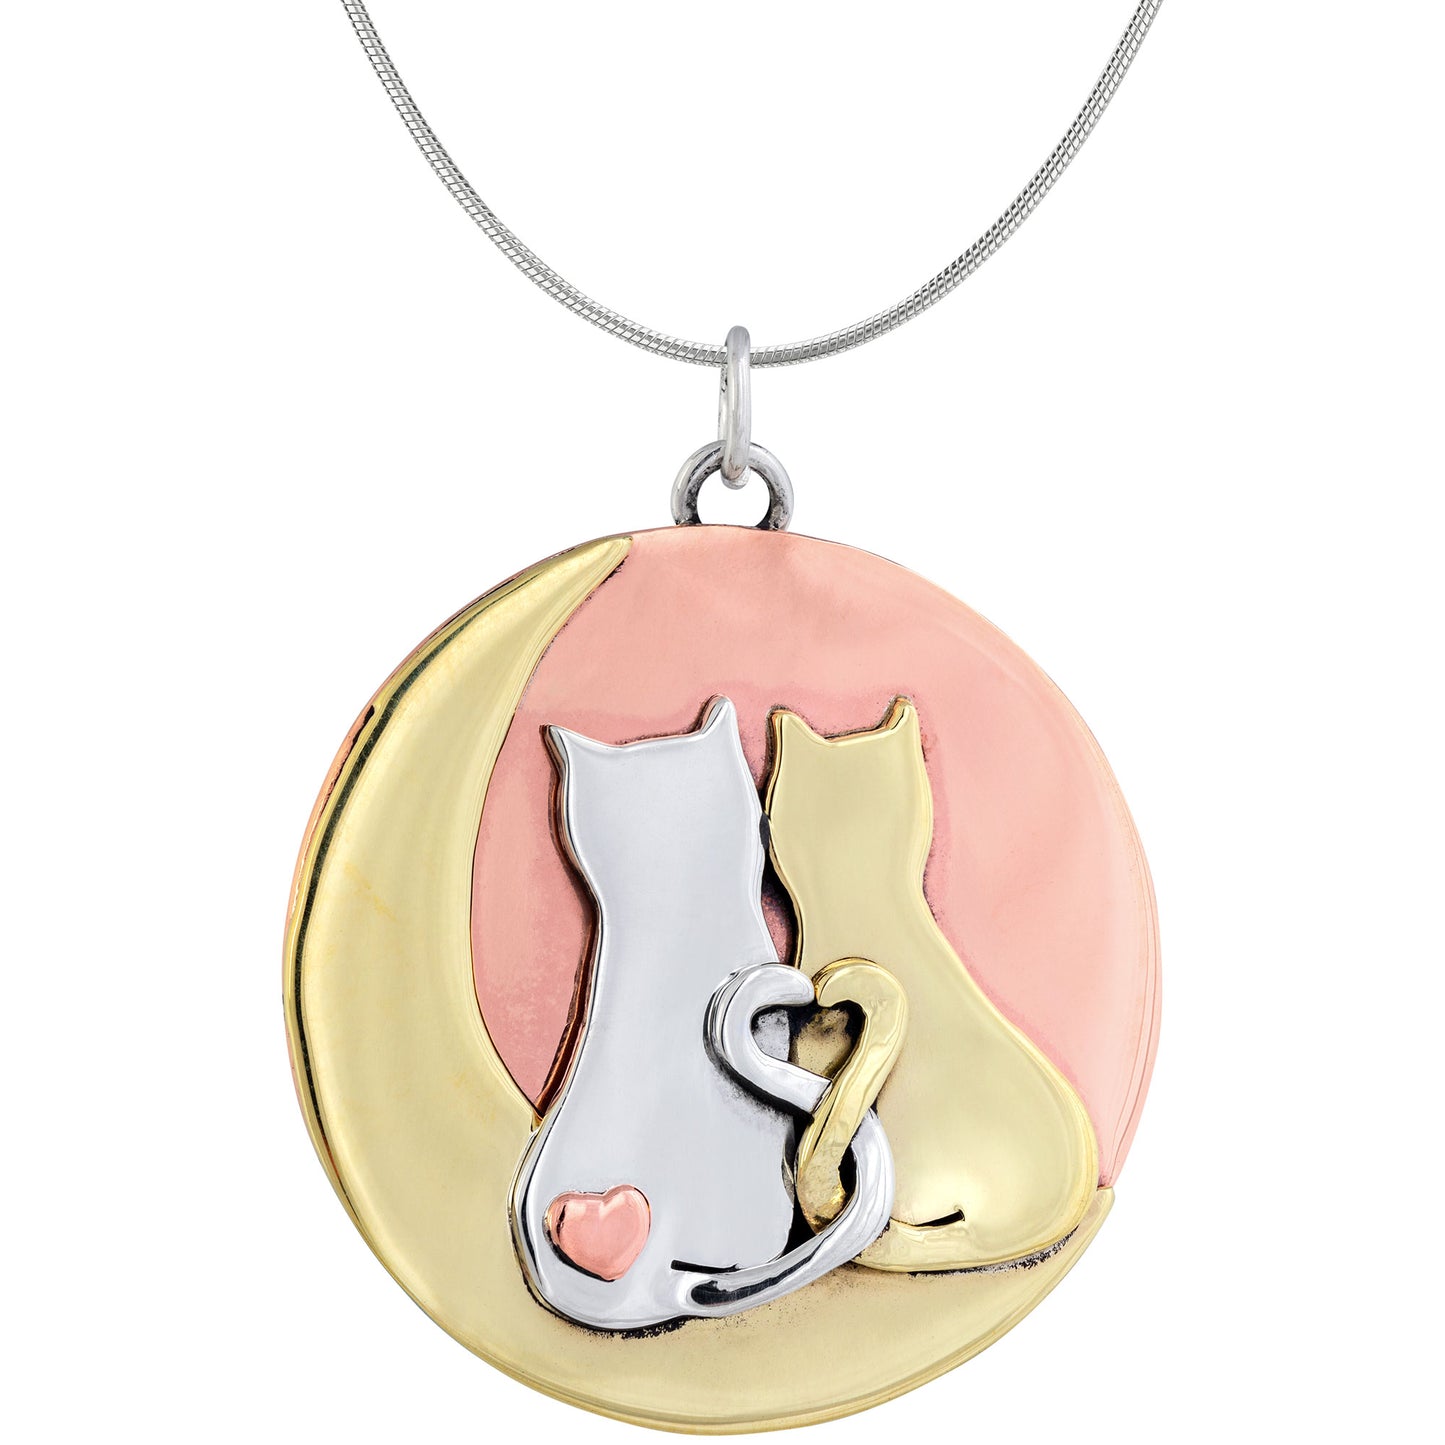 My Forever Sweetheart Cats Sterling Necklace